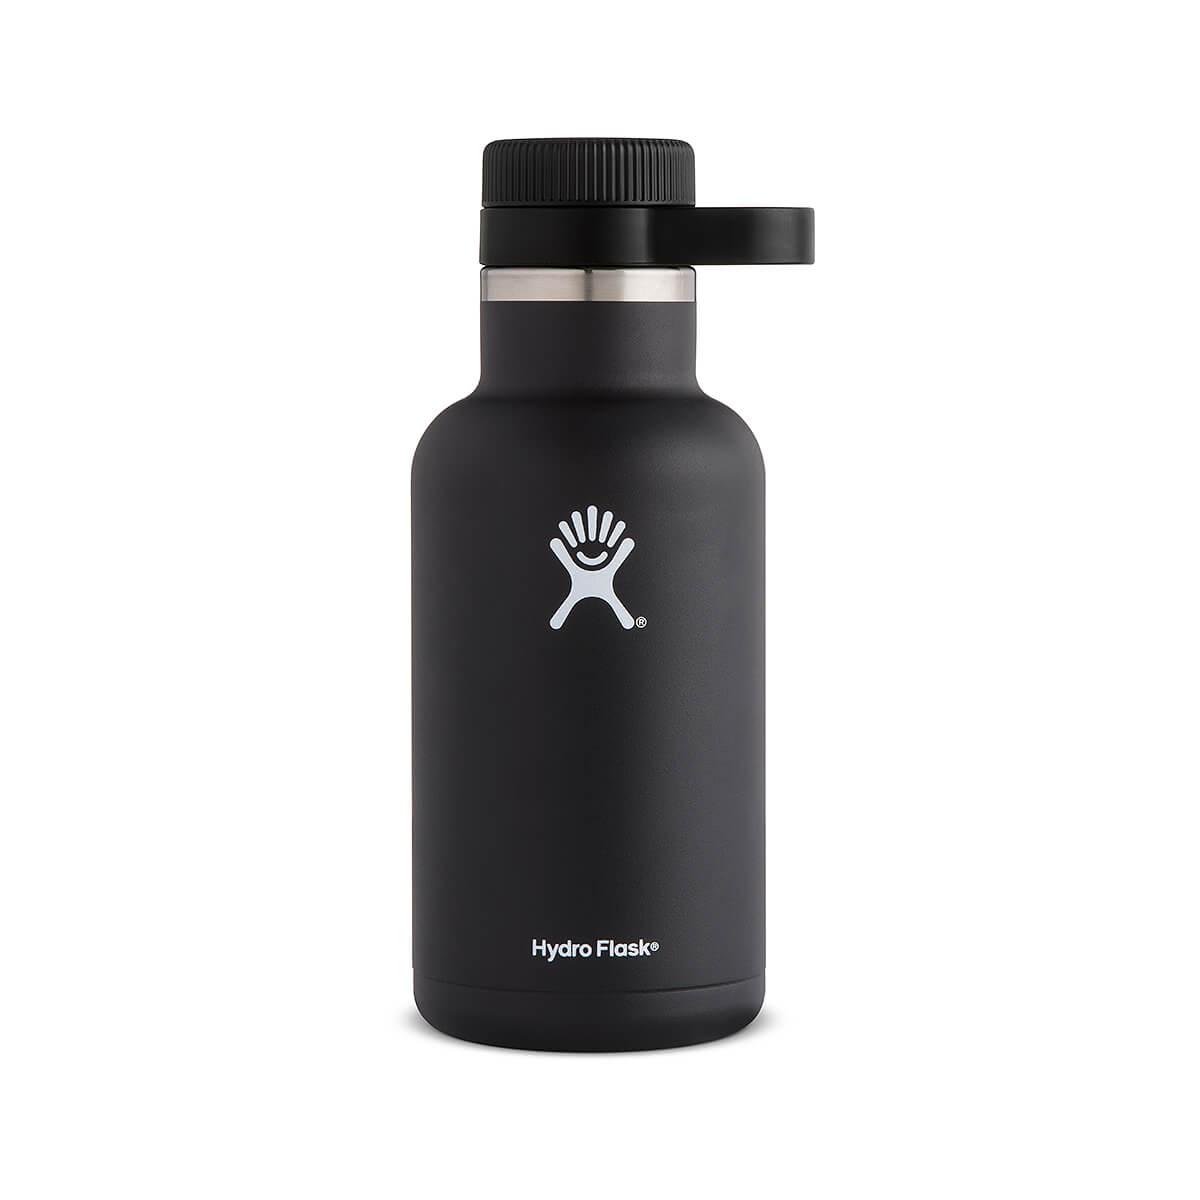  Growler Wide Mouth Bottle - 64 Ounce